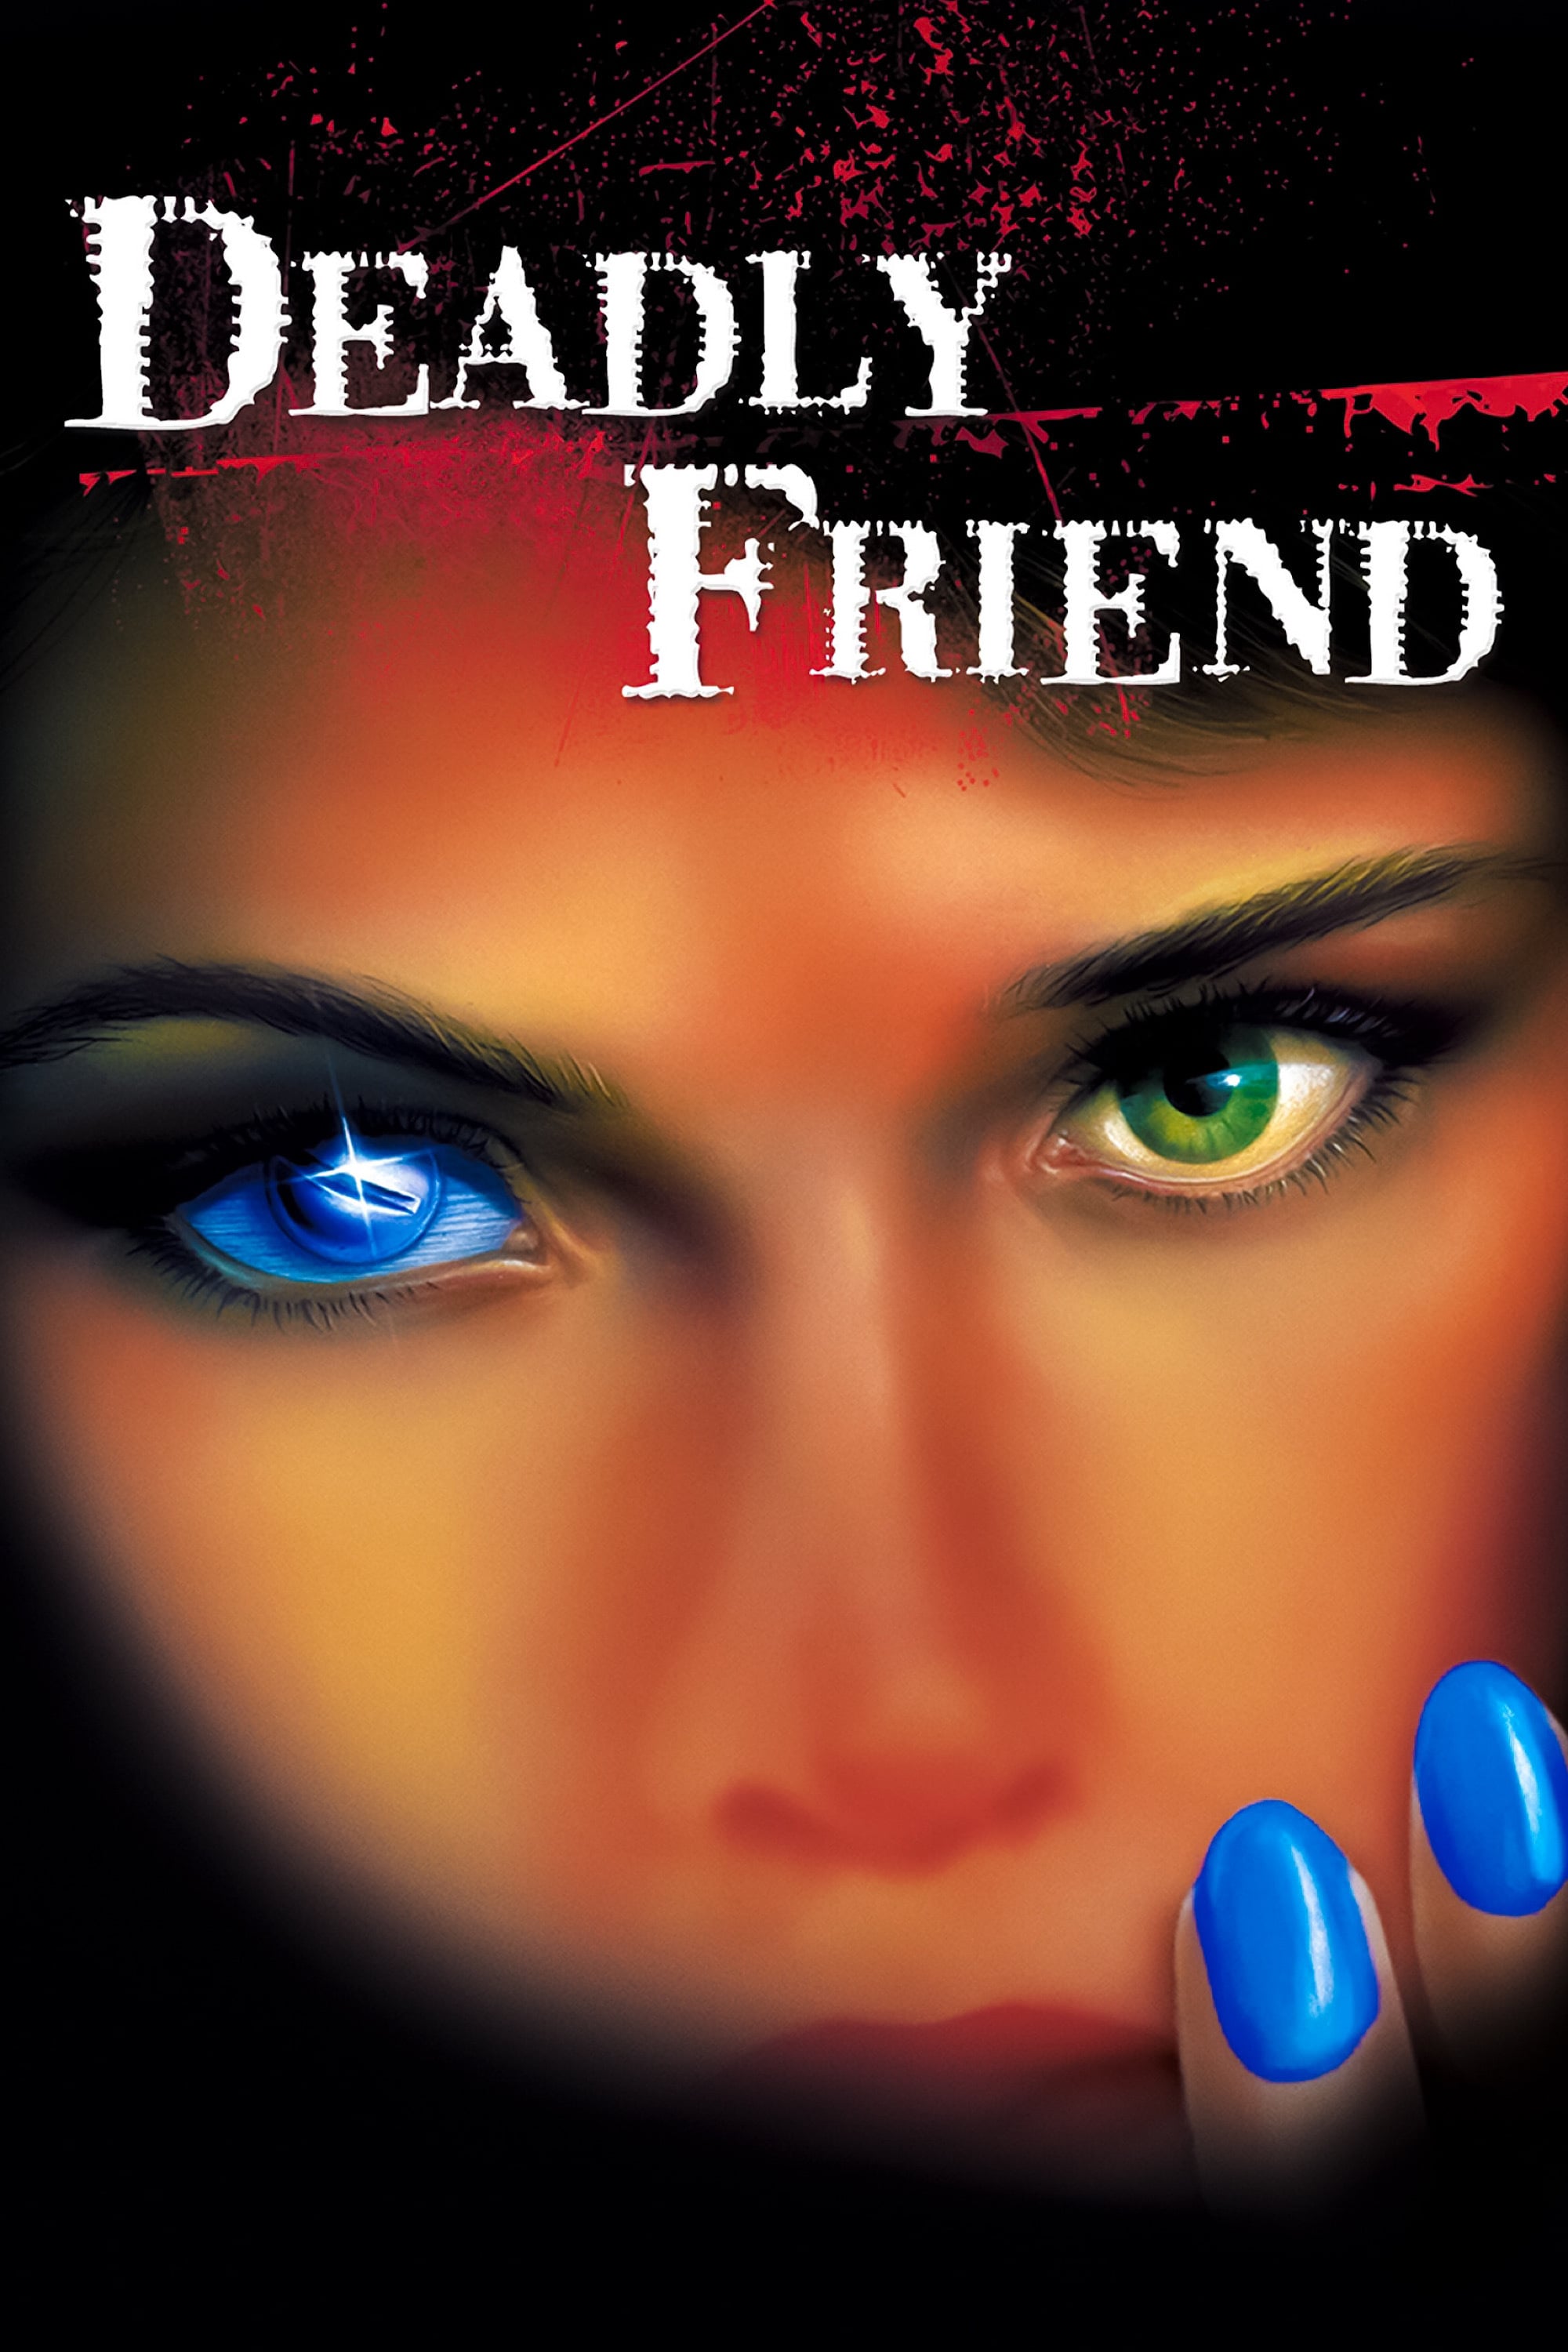 Deadly Friend (1986) Movie. Where To Watch Streaming Online